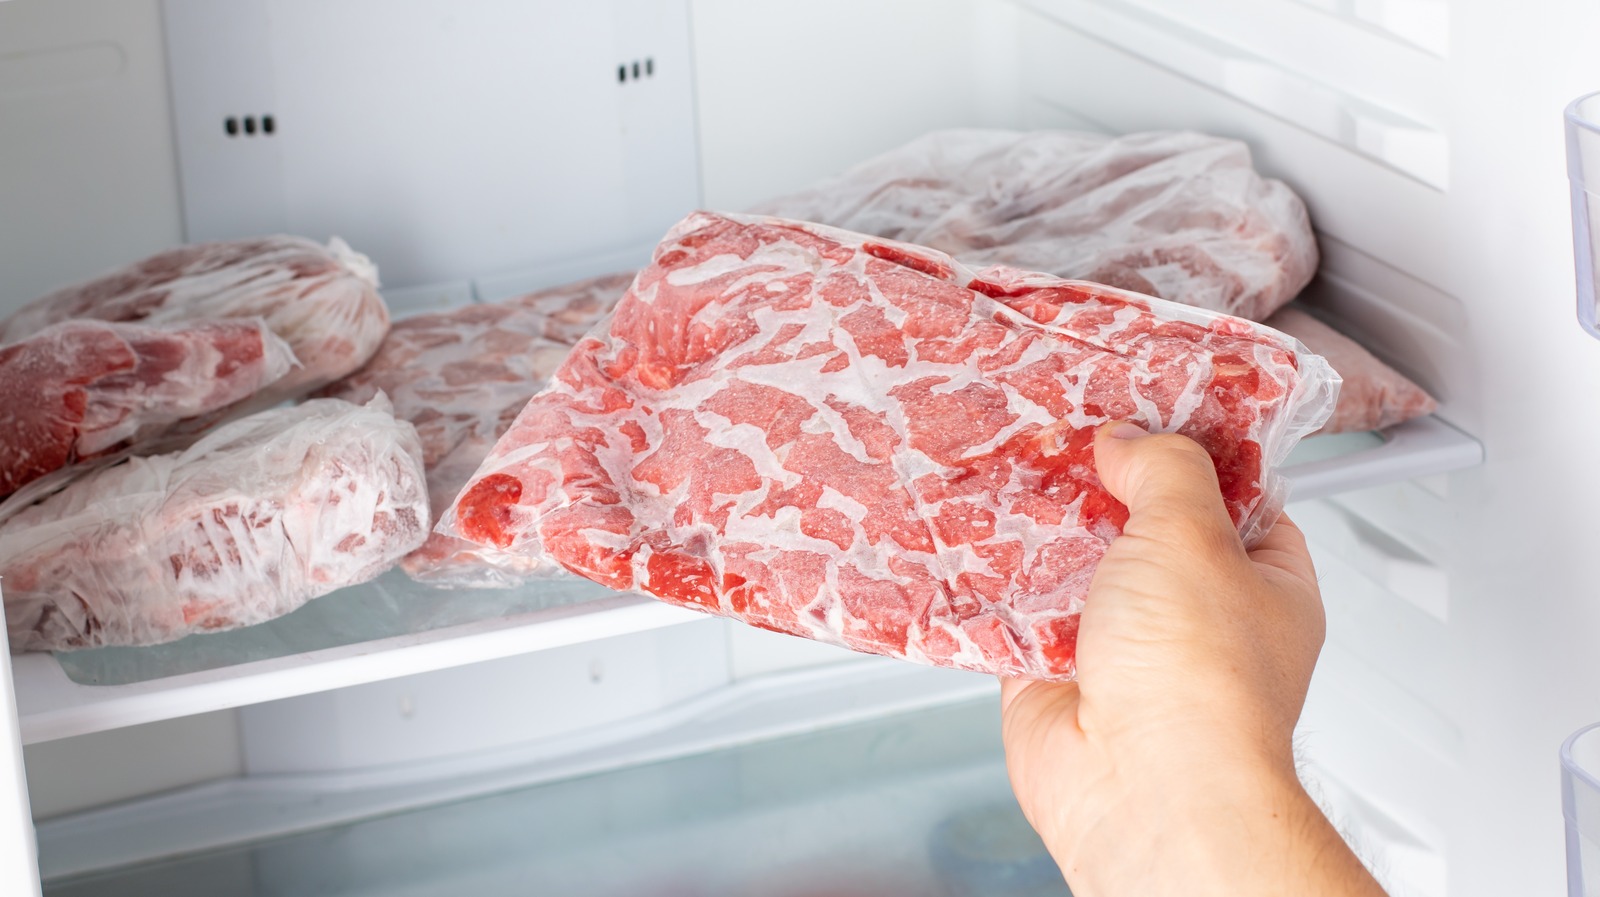 https://www.tastingtable.com/img/gallery/is-it-safe-to-eat-2-year-old-frozen-meat/l-intro-1698949711.jpg